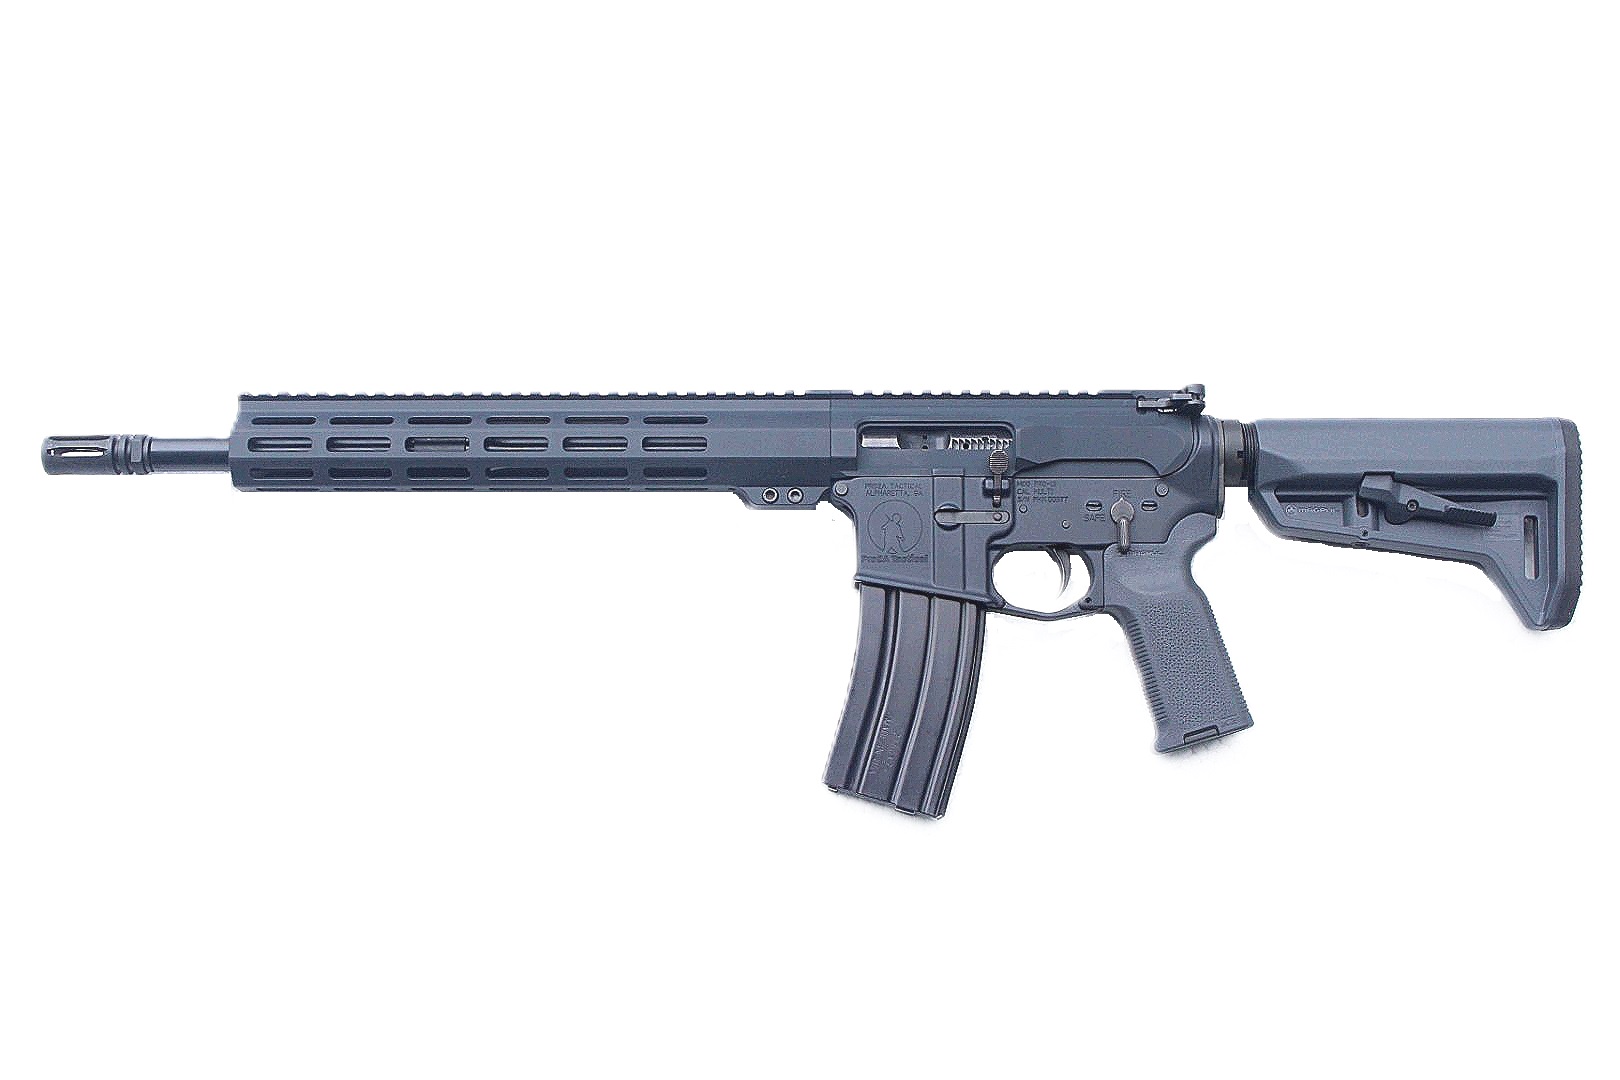 P2A PATRIOT LEFT HAND 14.5" 5.56 NATO 1/7 Carbine Length Melonite M-LOK Rifle - Pinned & Welded - GRAY